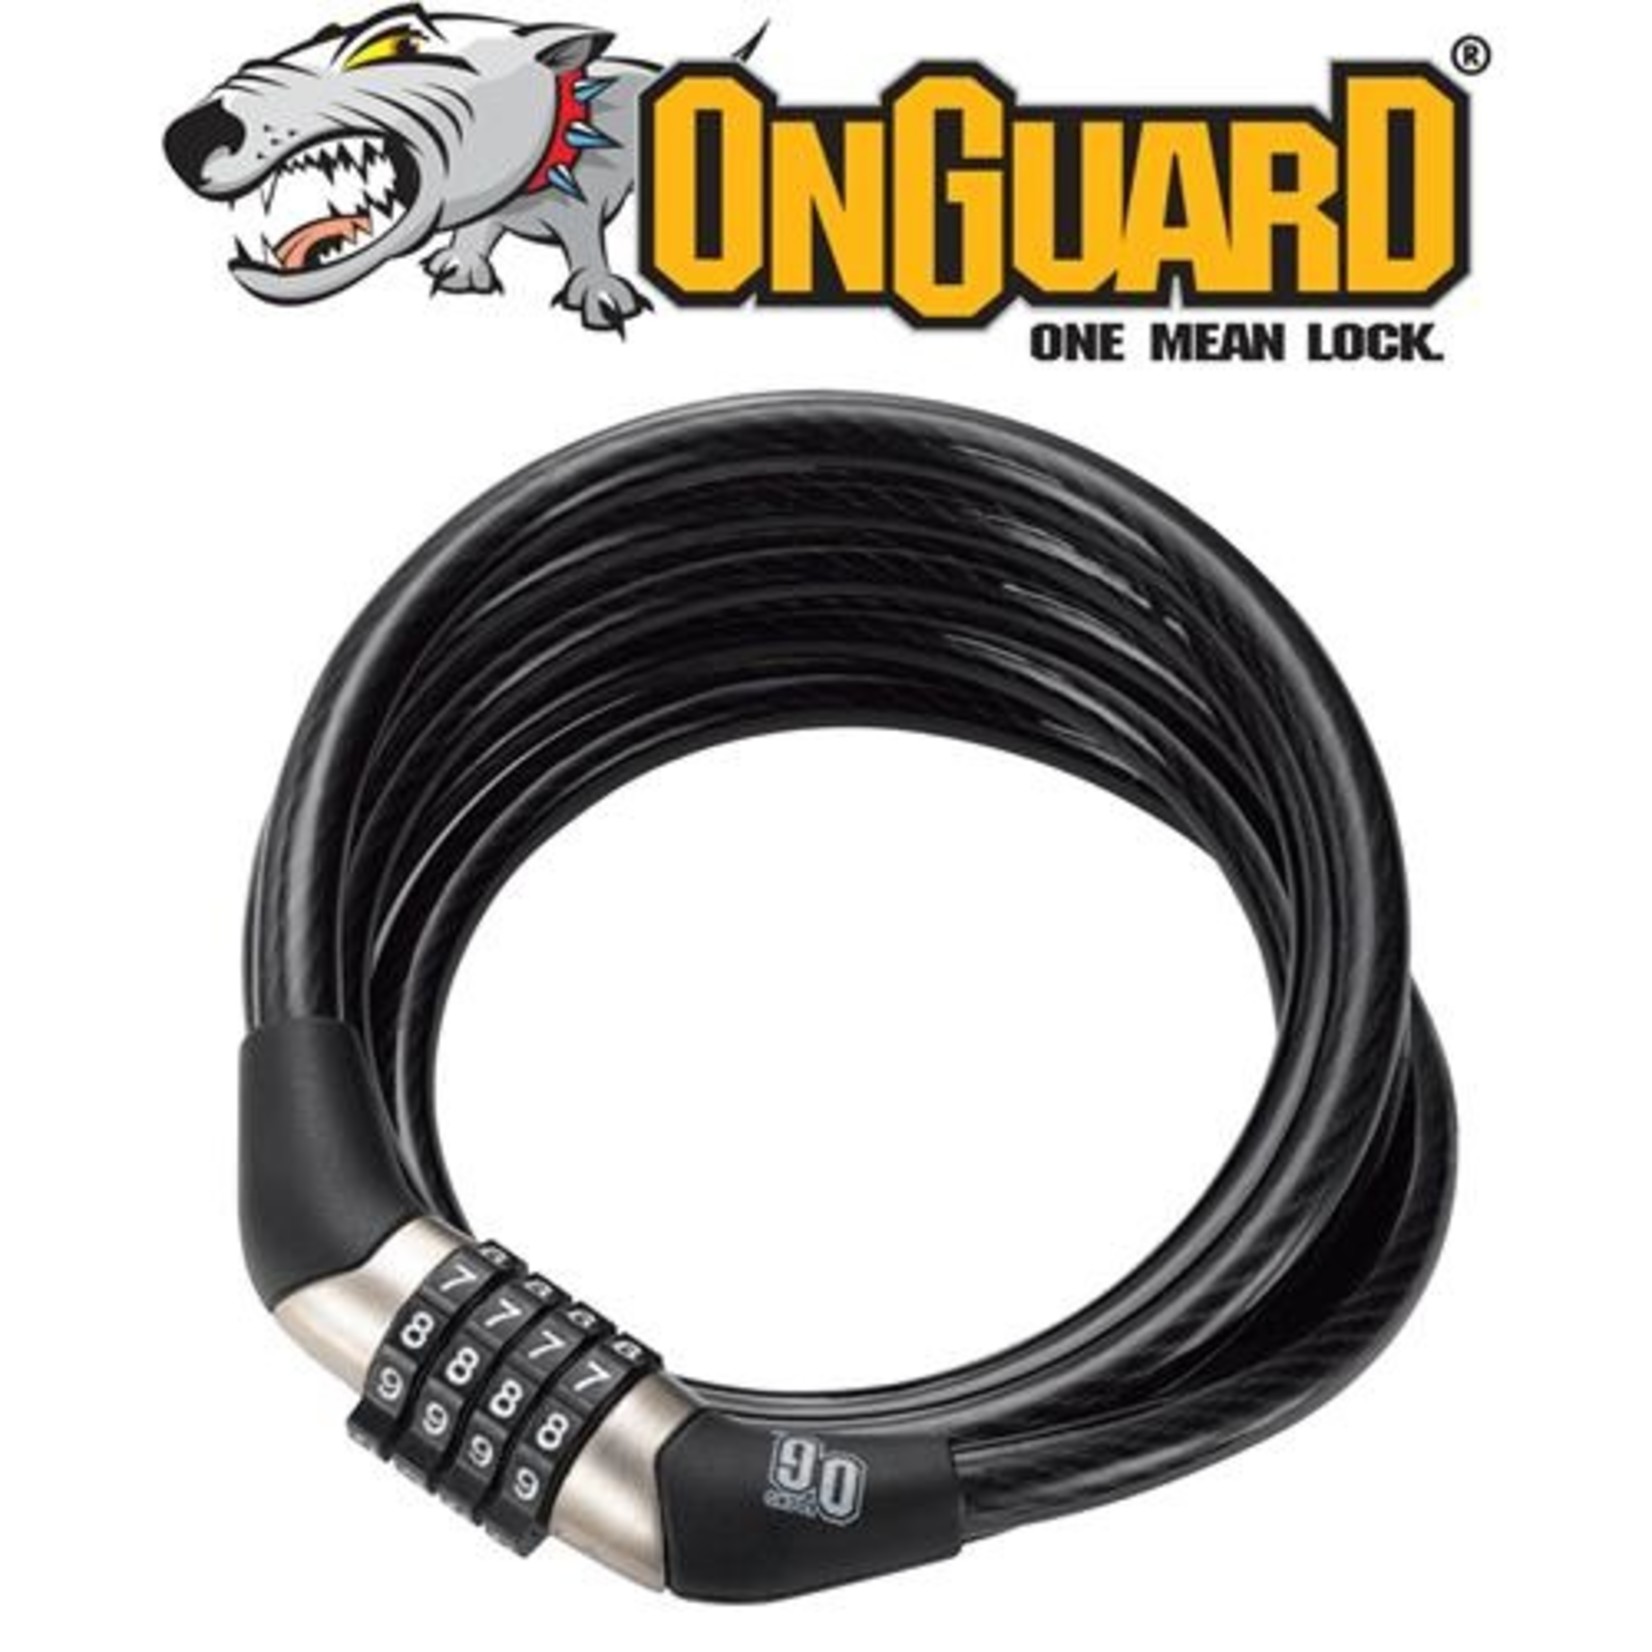 Onguard Onguard Bike Lock - OG Series - Coiled Cable Lock Combo - 150cm x 8mm